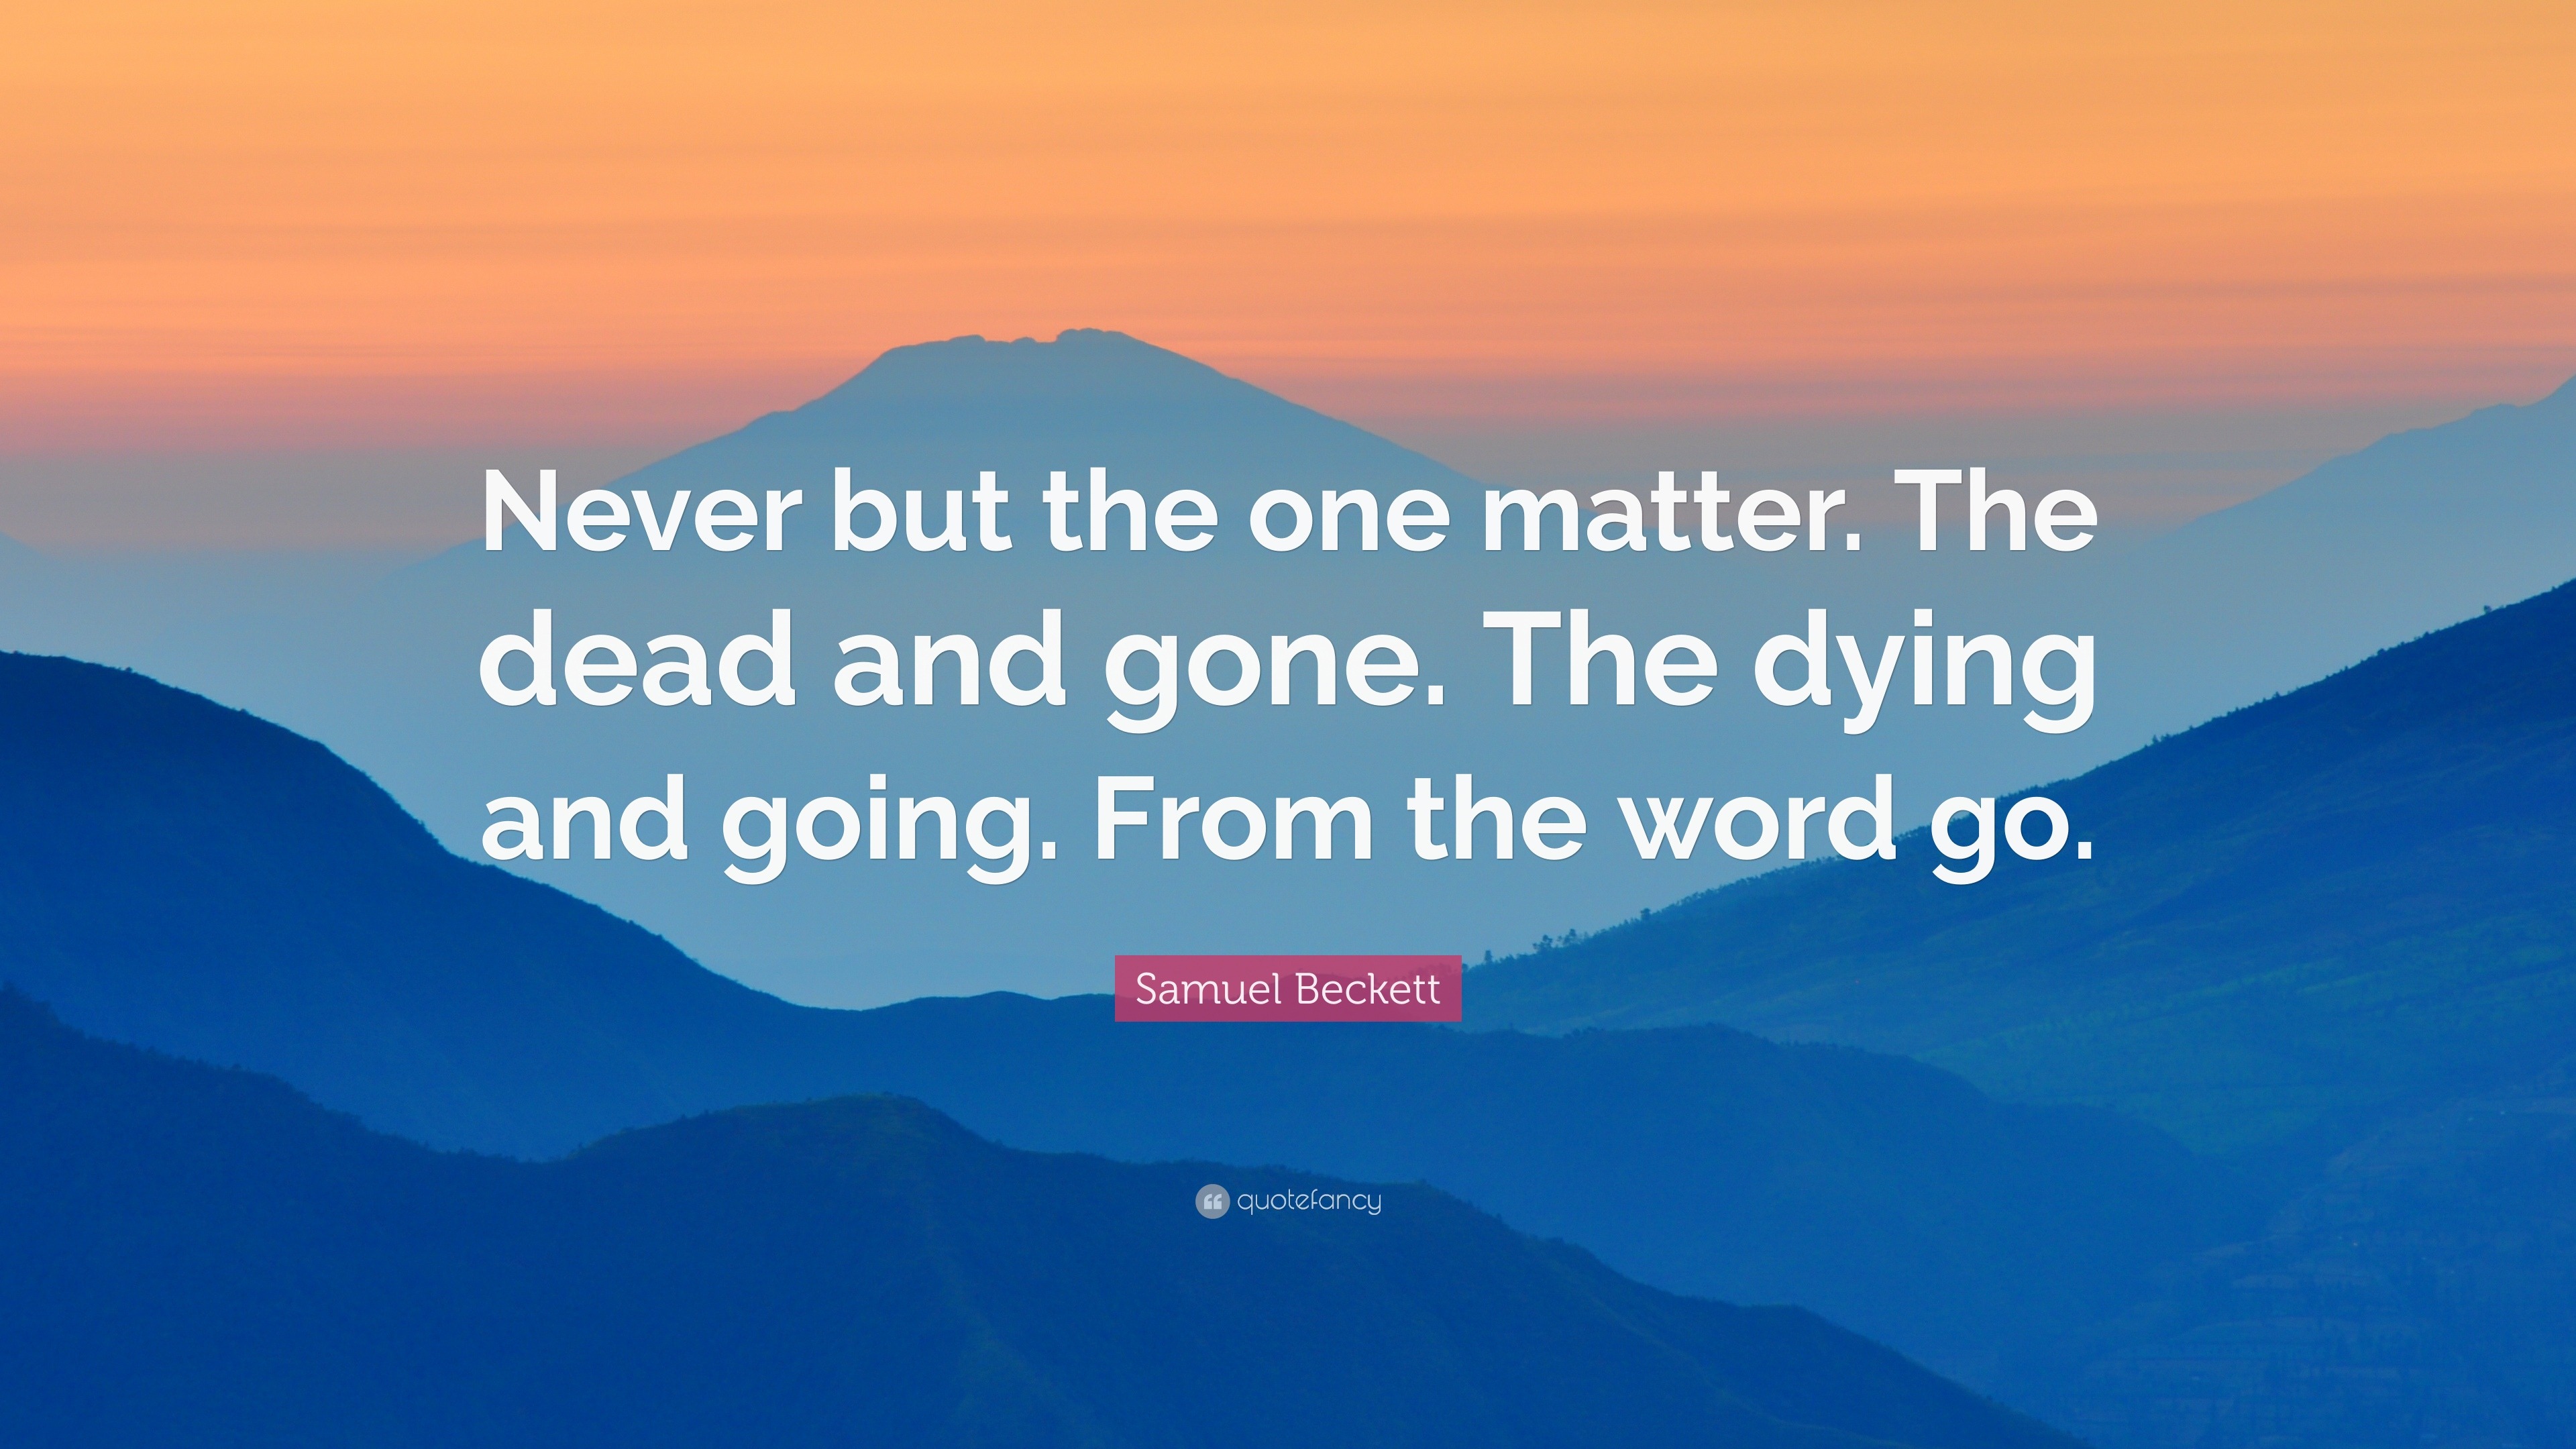 Samuel Beckett Quote: “Never but the one matter. The dead and gone. The ...